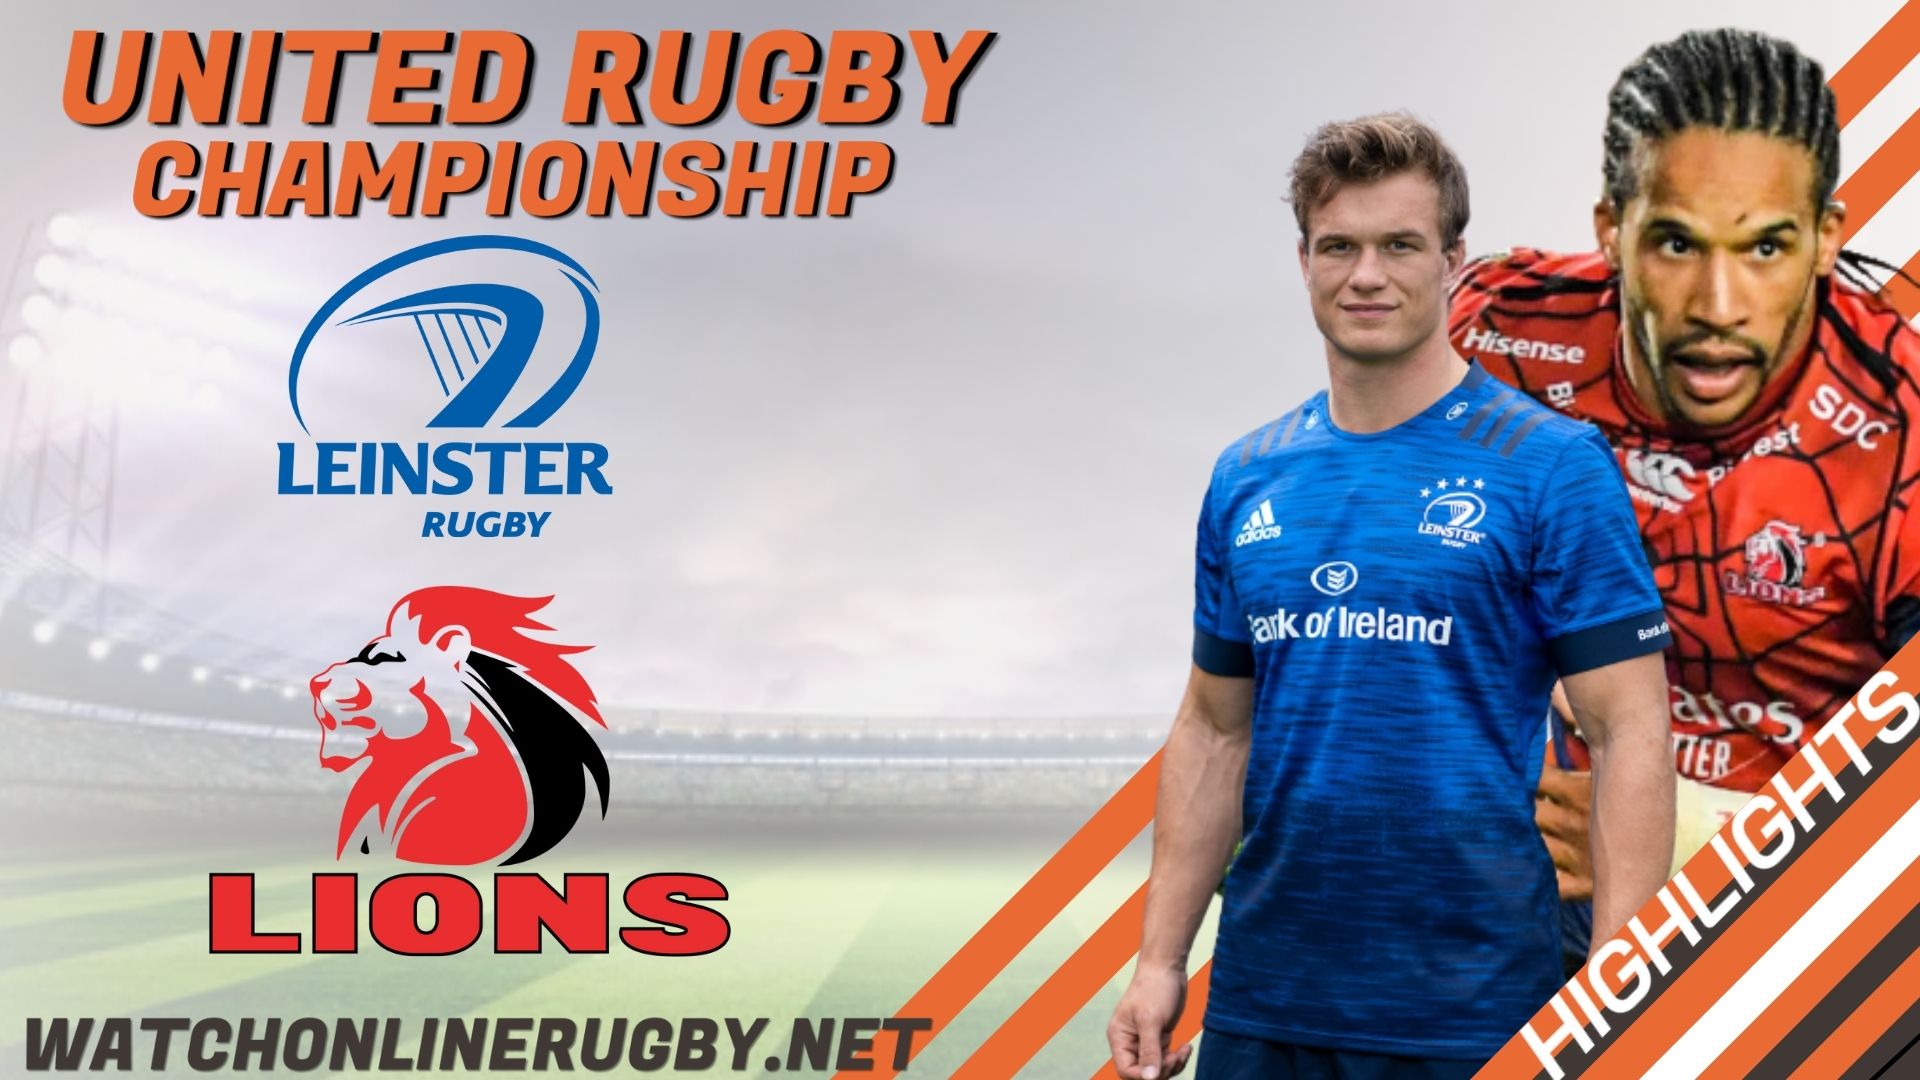 Leinster Vs Lions United Rugby Championship 2022 RD 10